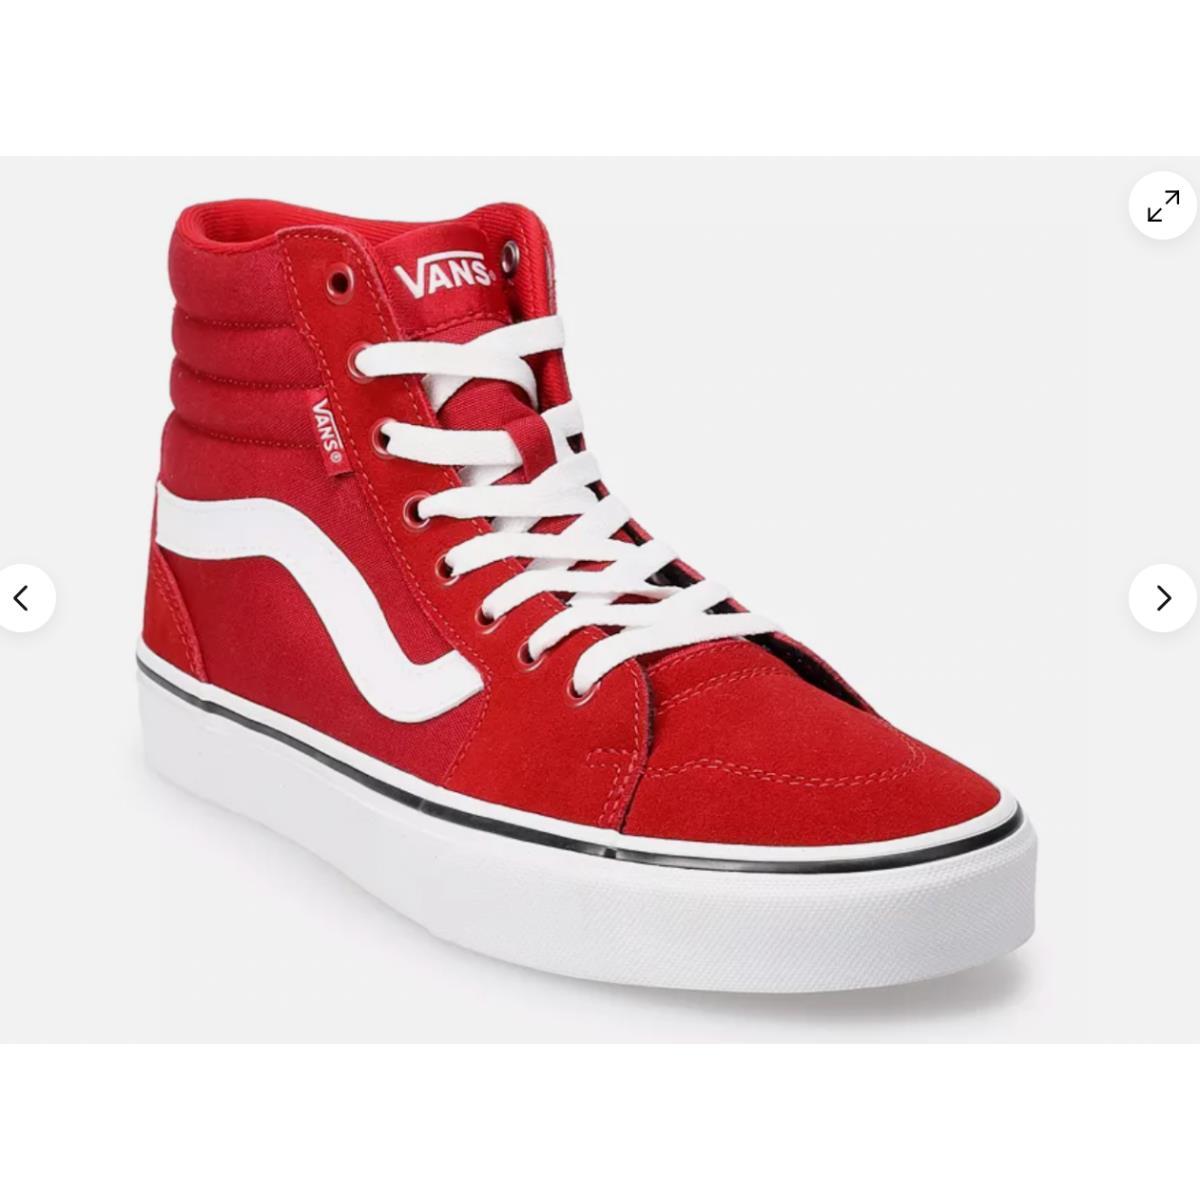 Vans Filmore High Top Shoes Men`s Size 13 Red Suede Athletic Skate Sneakers